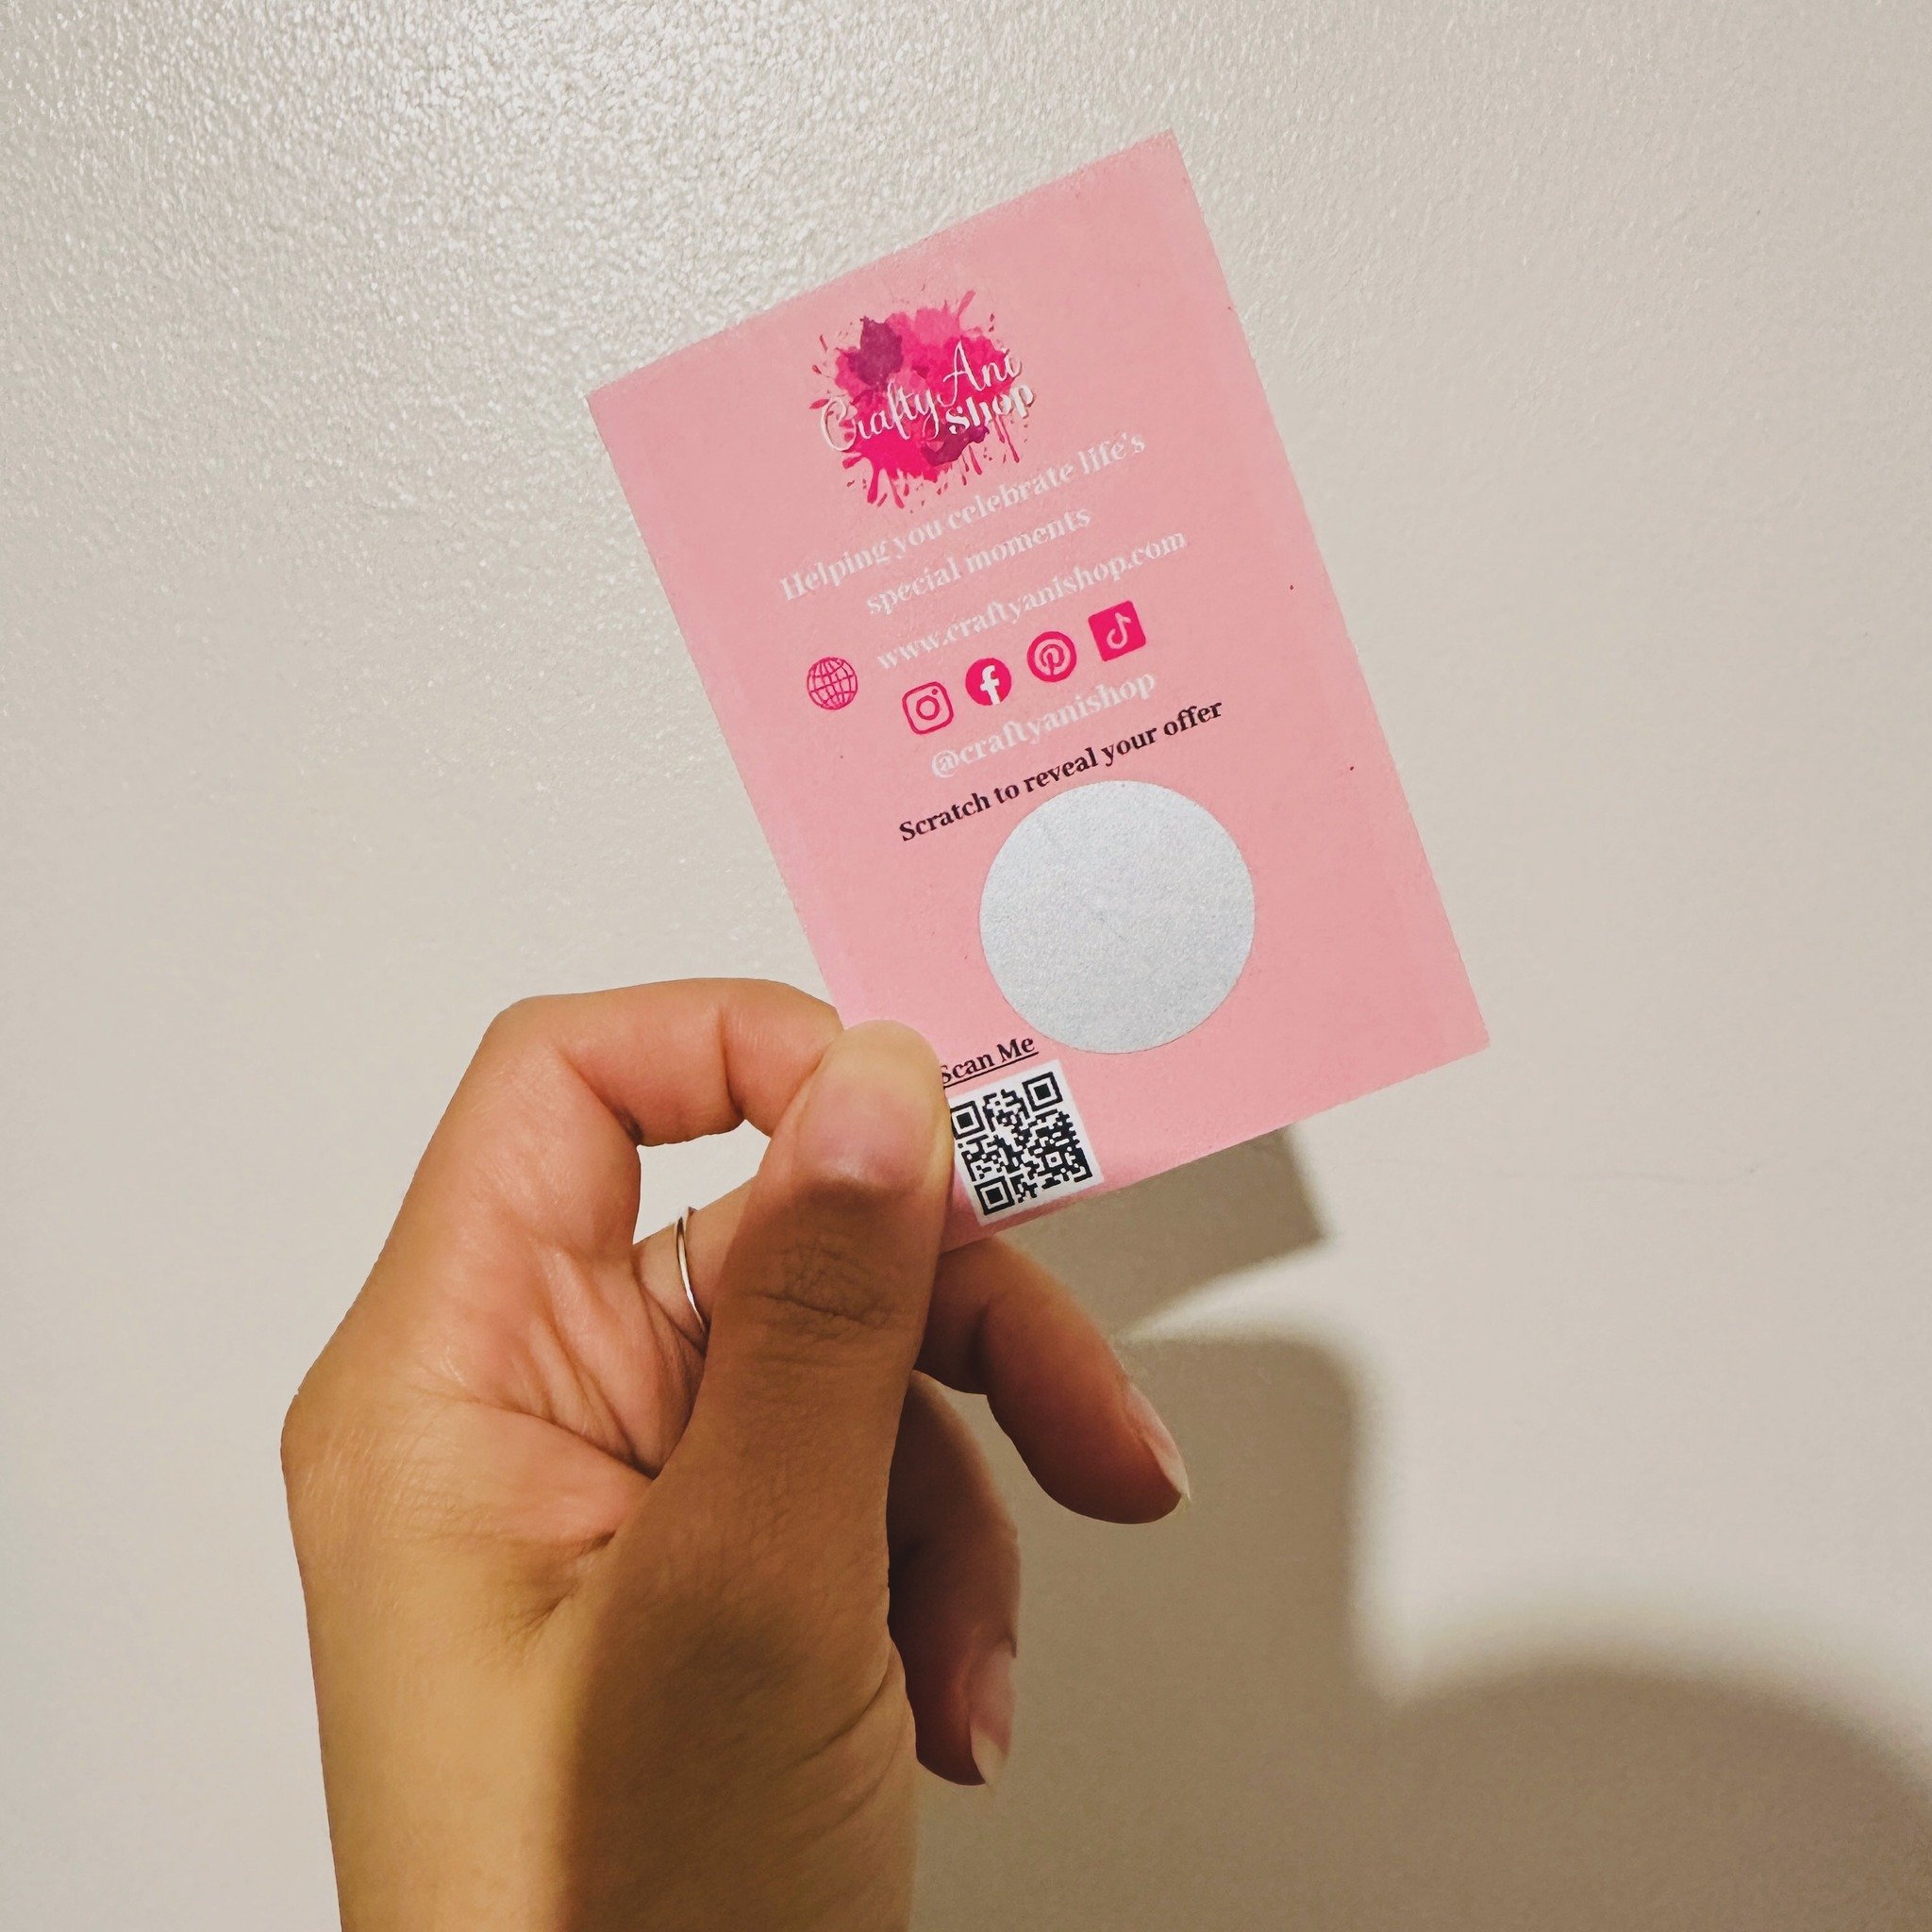 Are you looking for a fun way to connect with your customers? These custom printed scratch cards are the perfect way to get your customers to interact at popups.

I created these for my popups last year, to offer giveaways/discounts, and they were a 